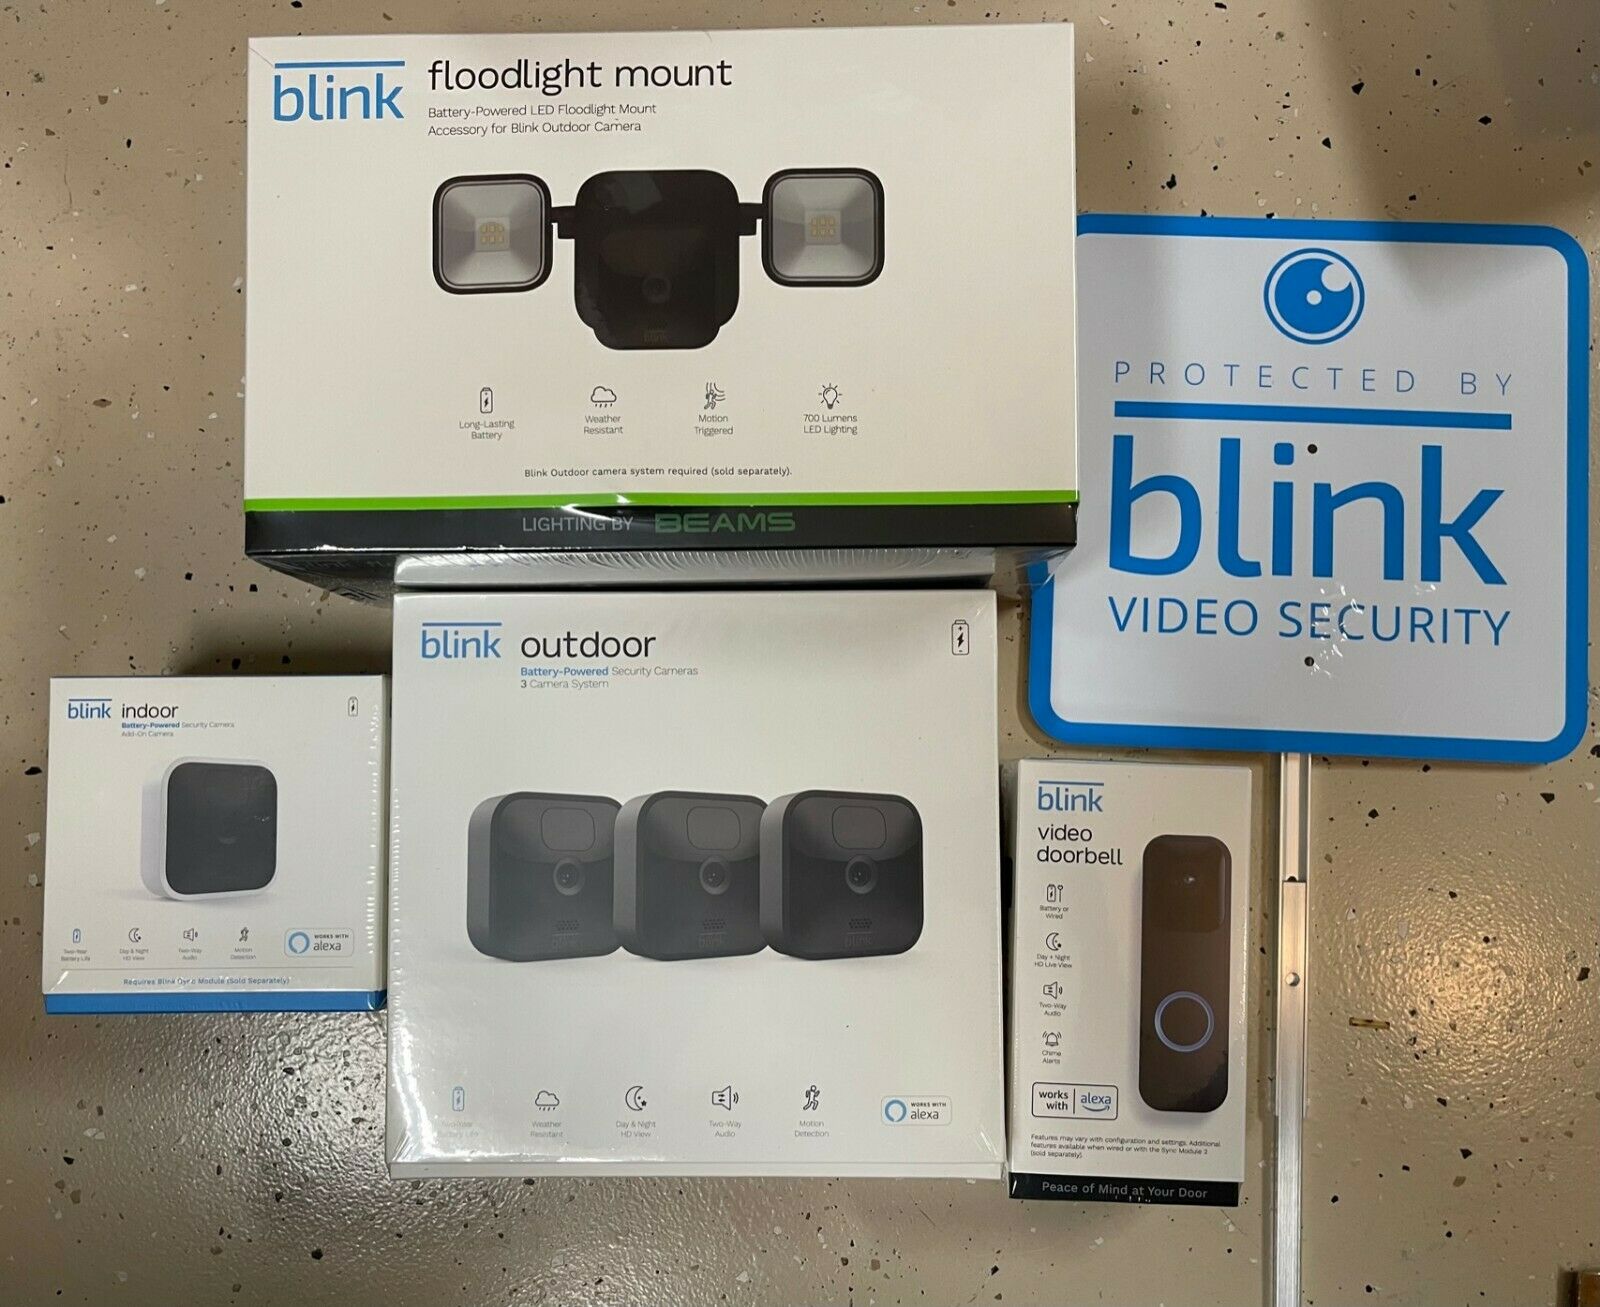 Blink Home Security Camera